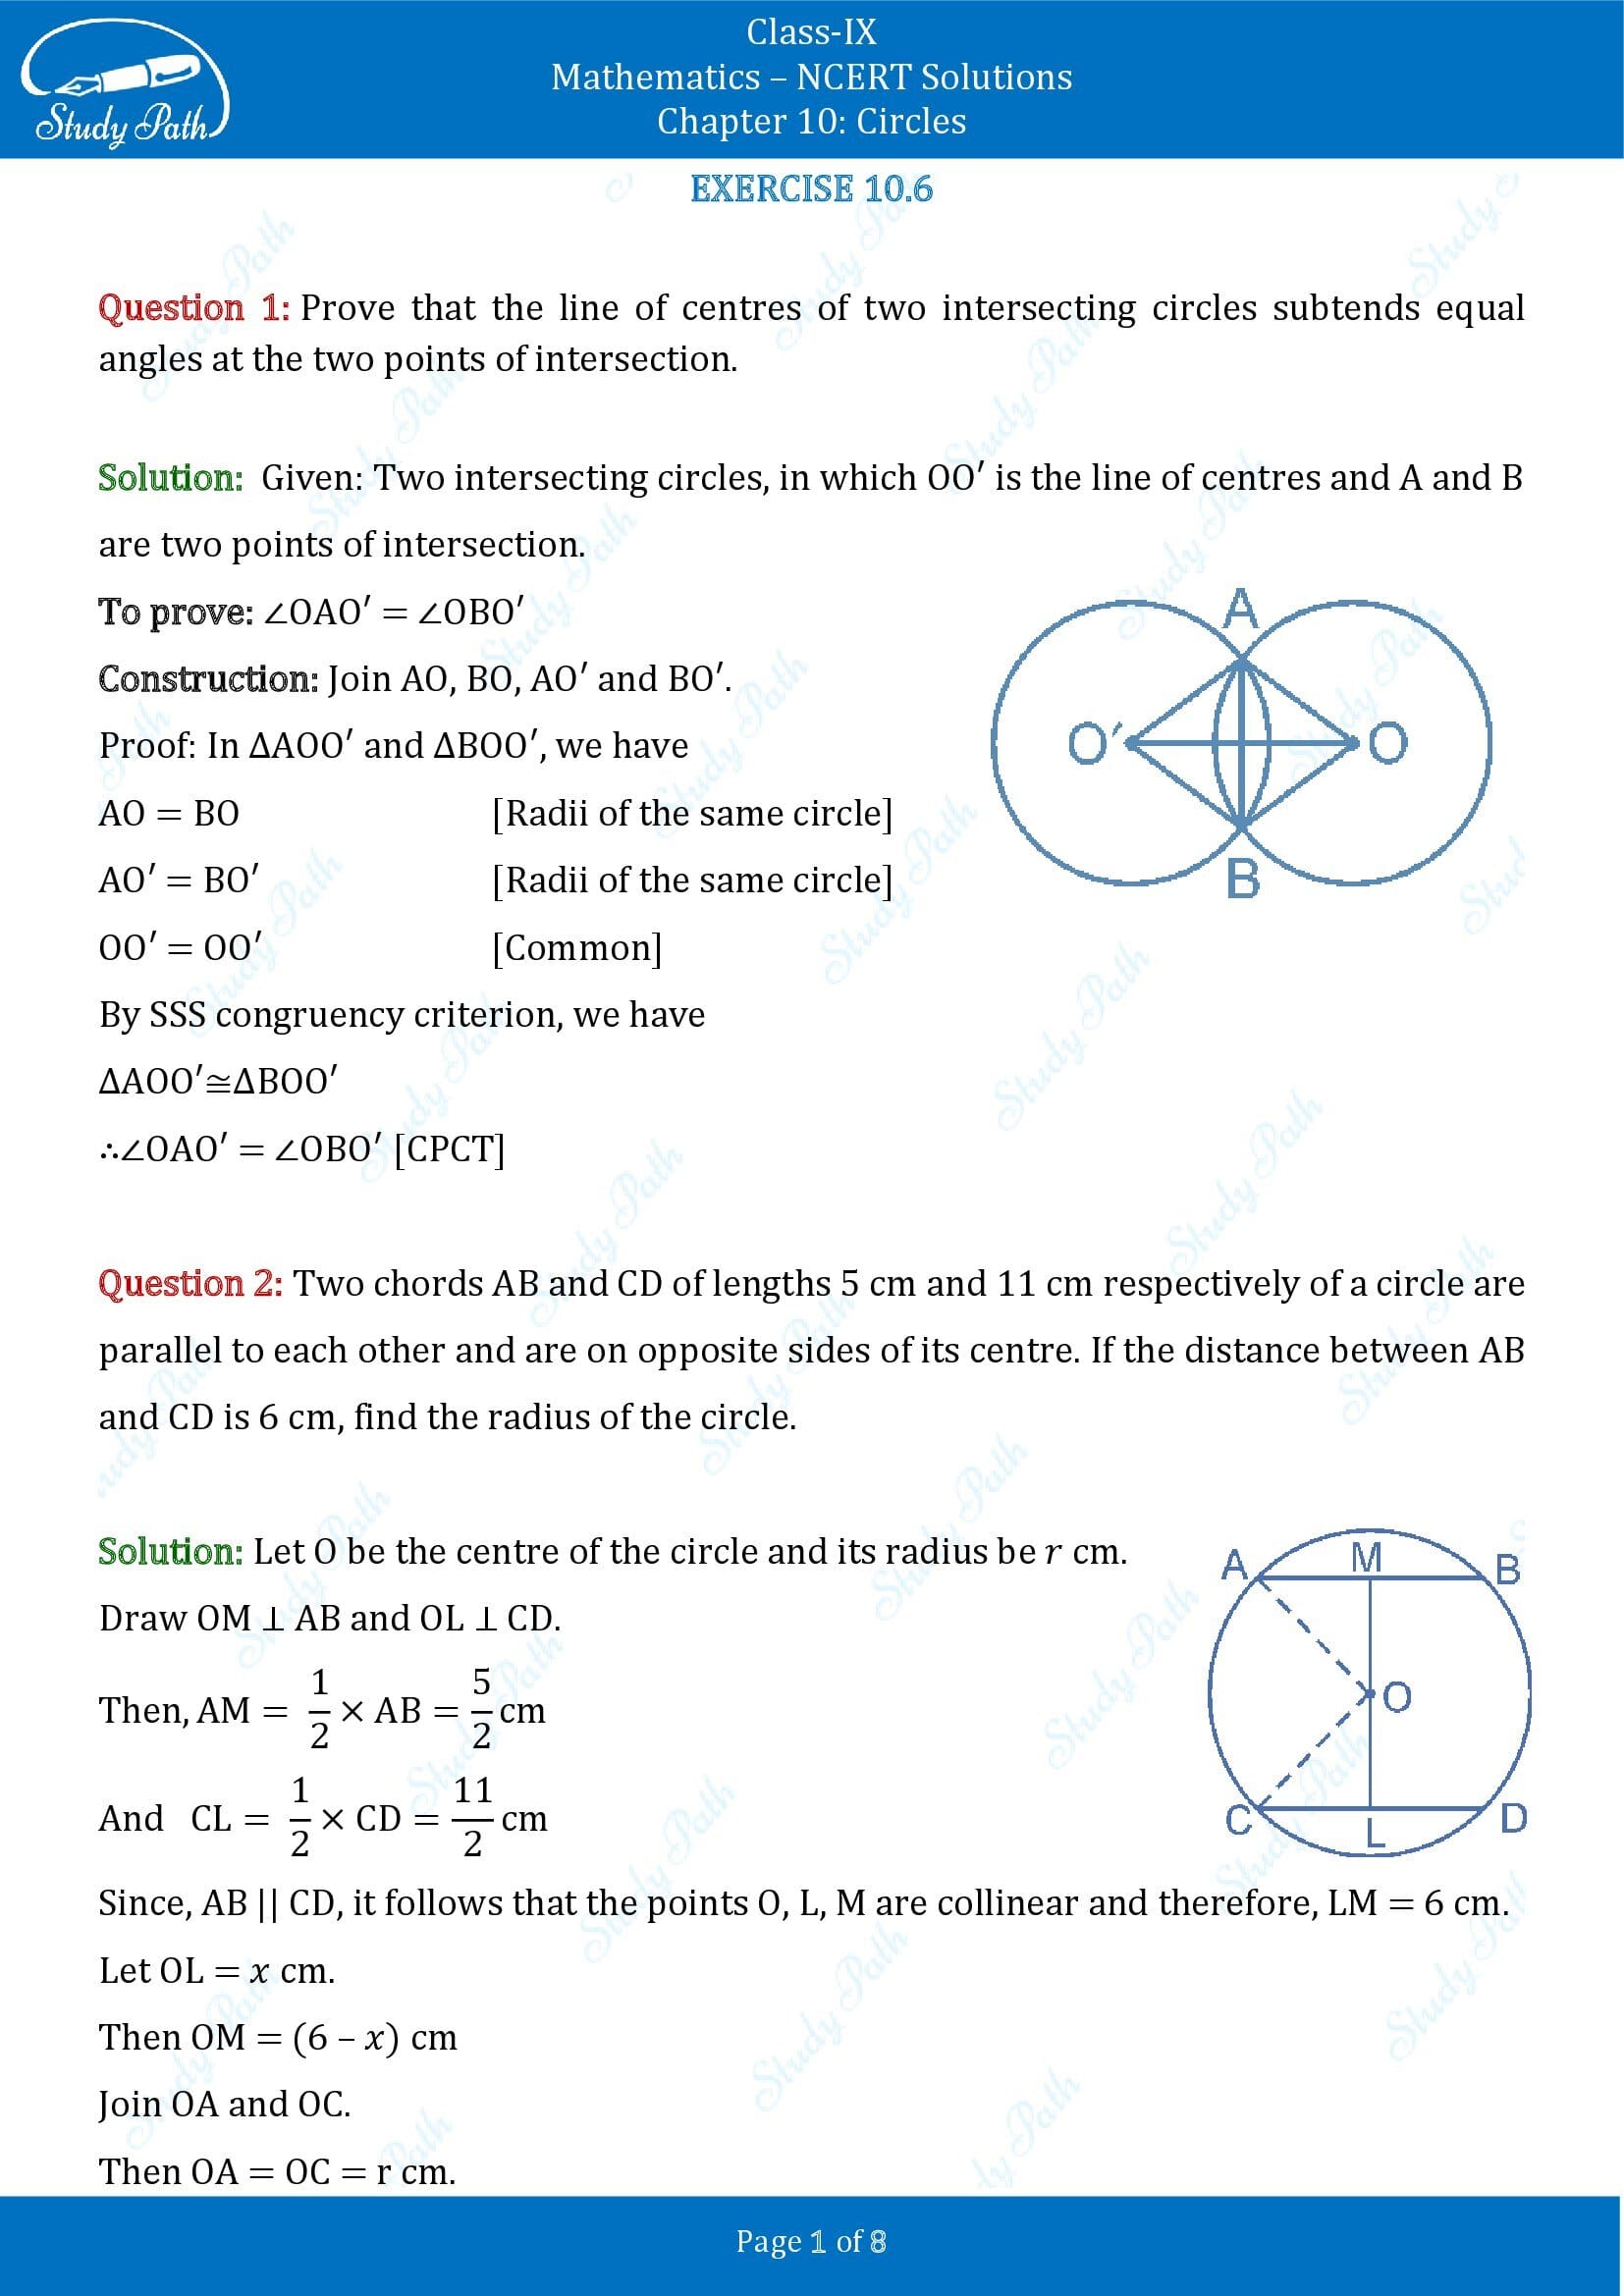 NCERT Solutions for Class 9 Maths Chapter 10 Circles Exercise 10.6 00001